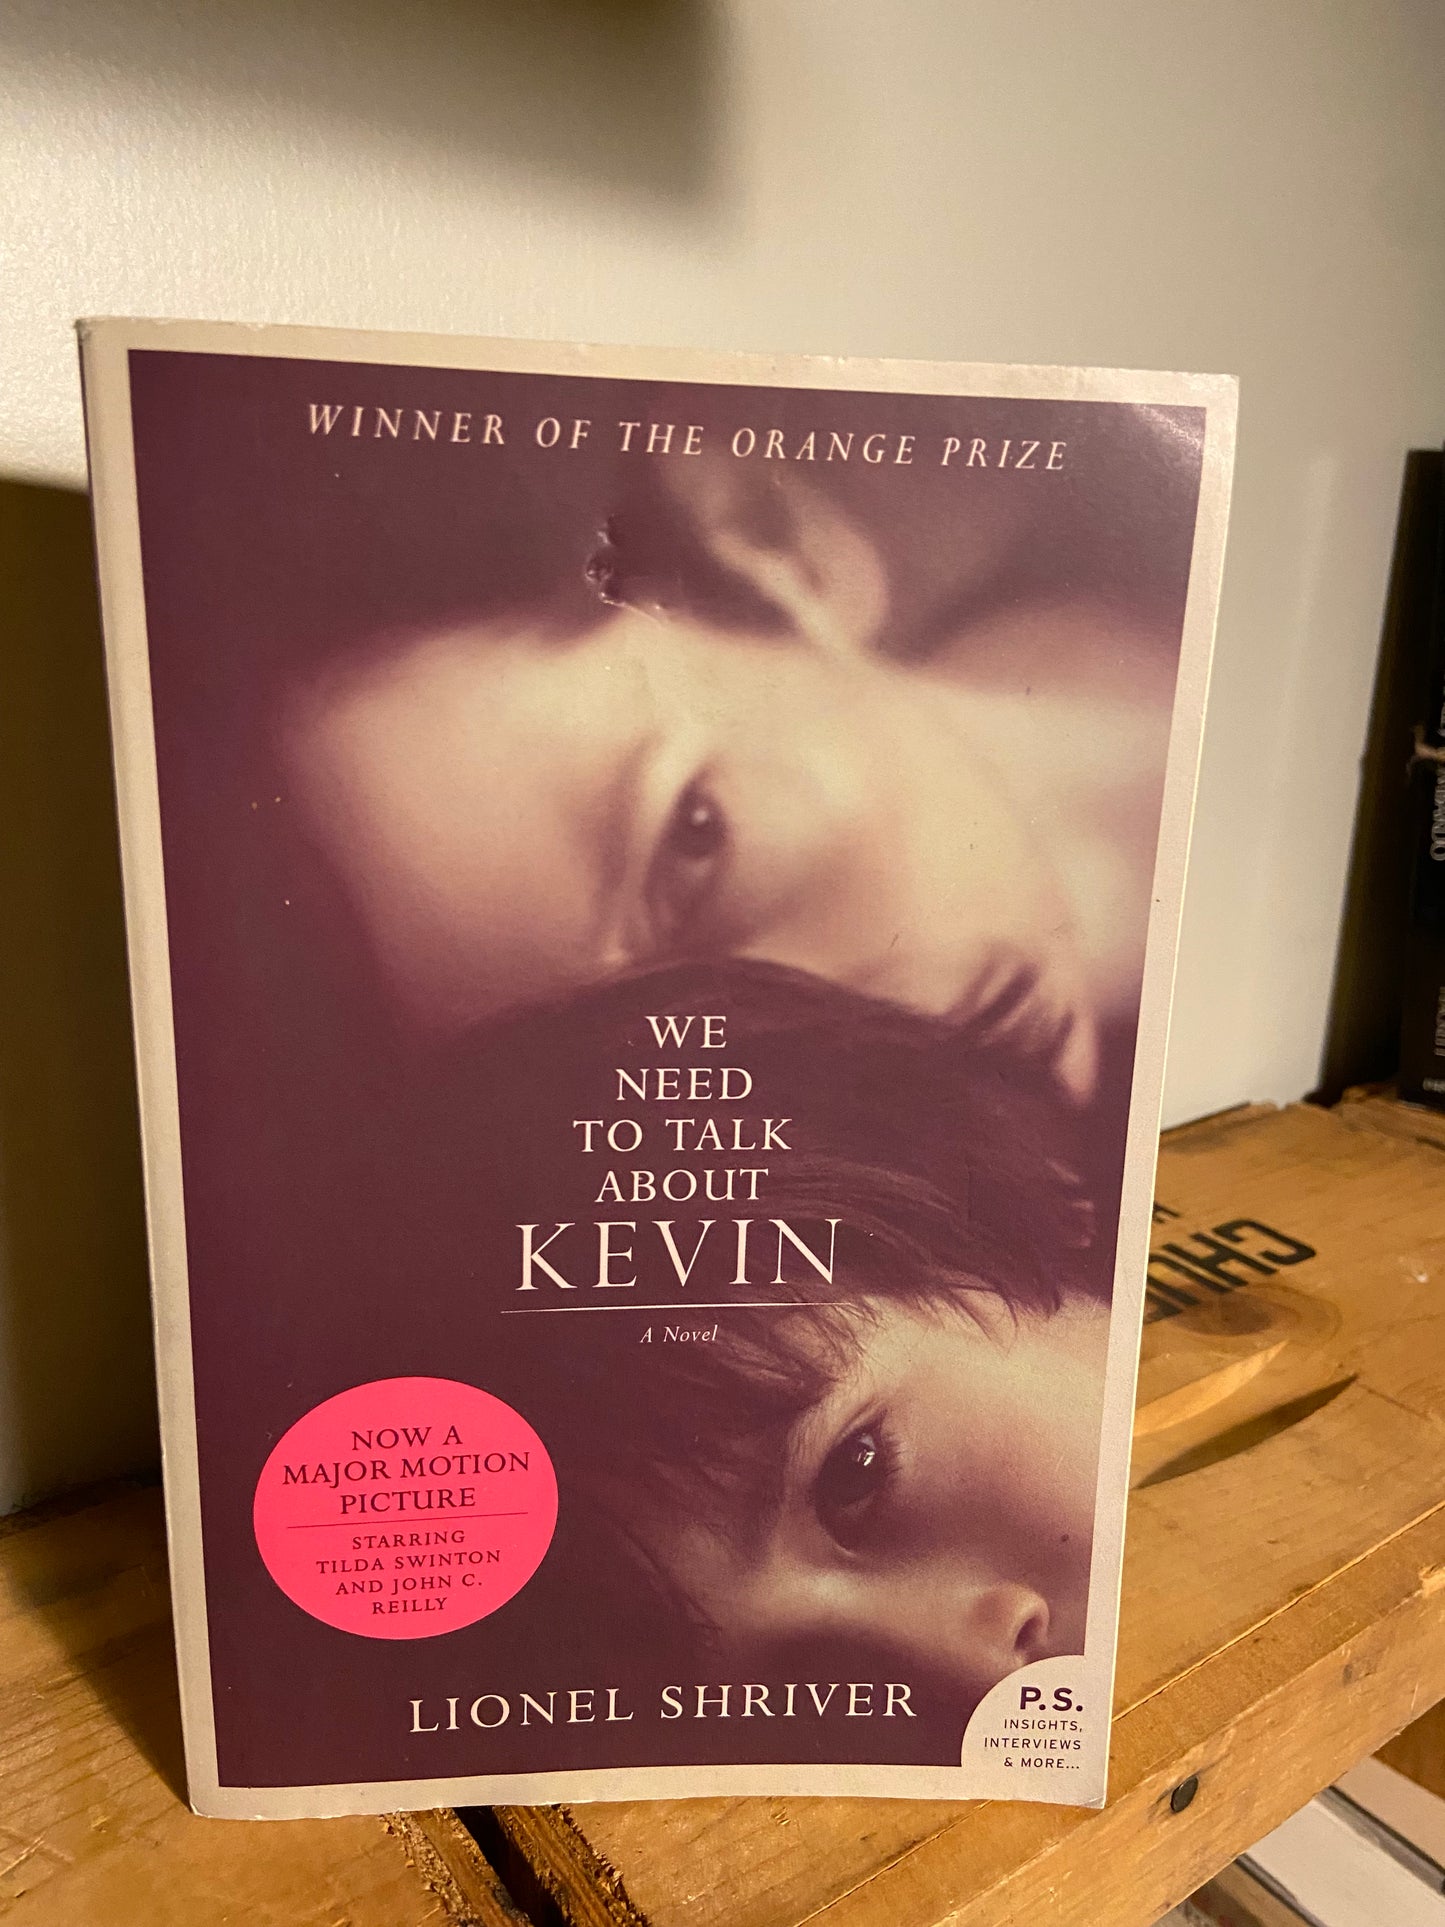 We Need to Talk about Kevin - Lionel Shriver